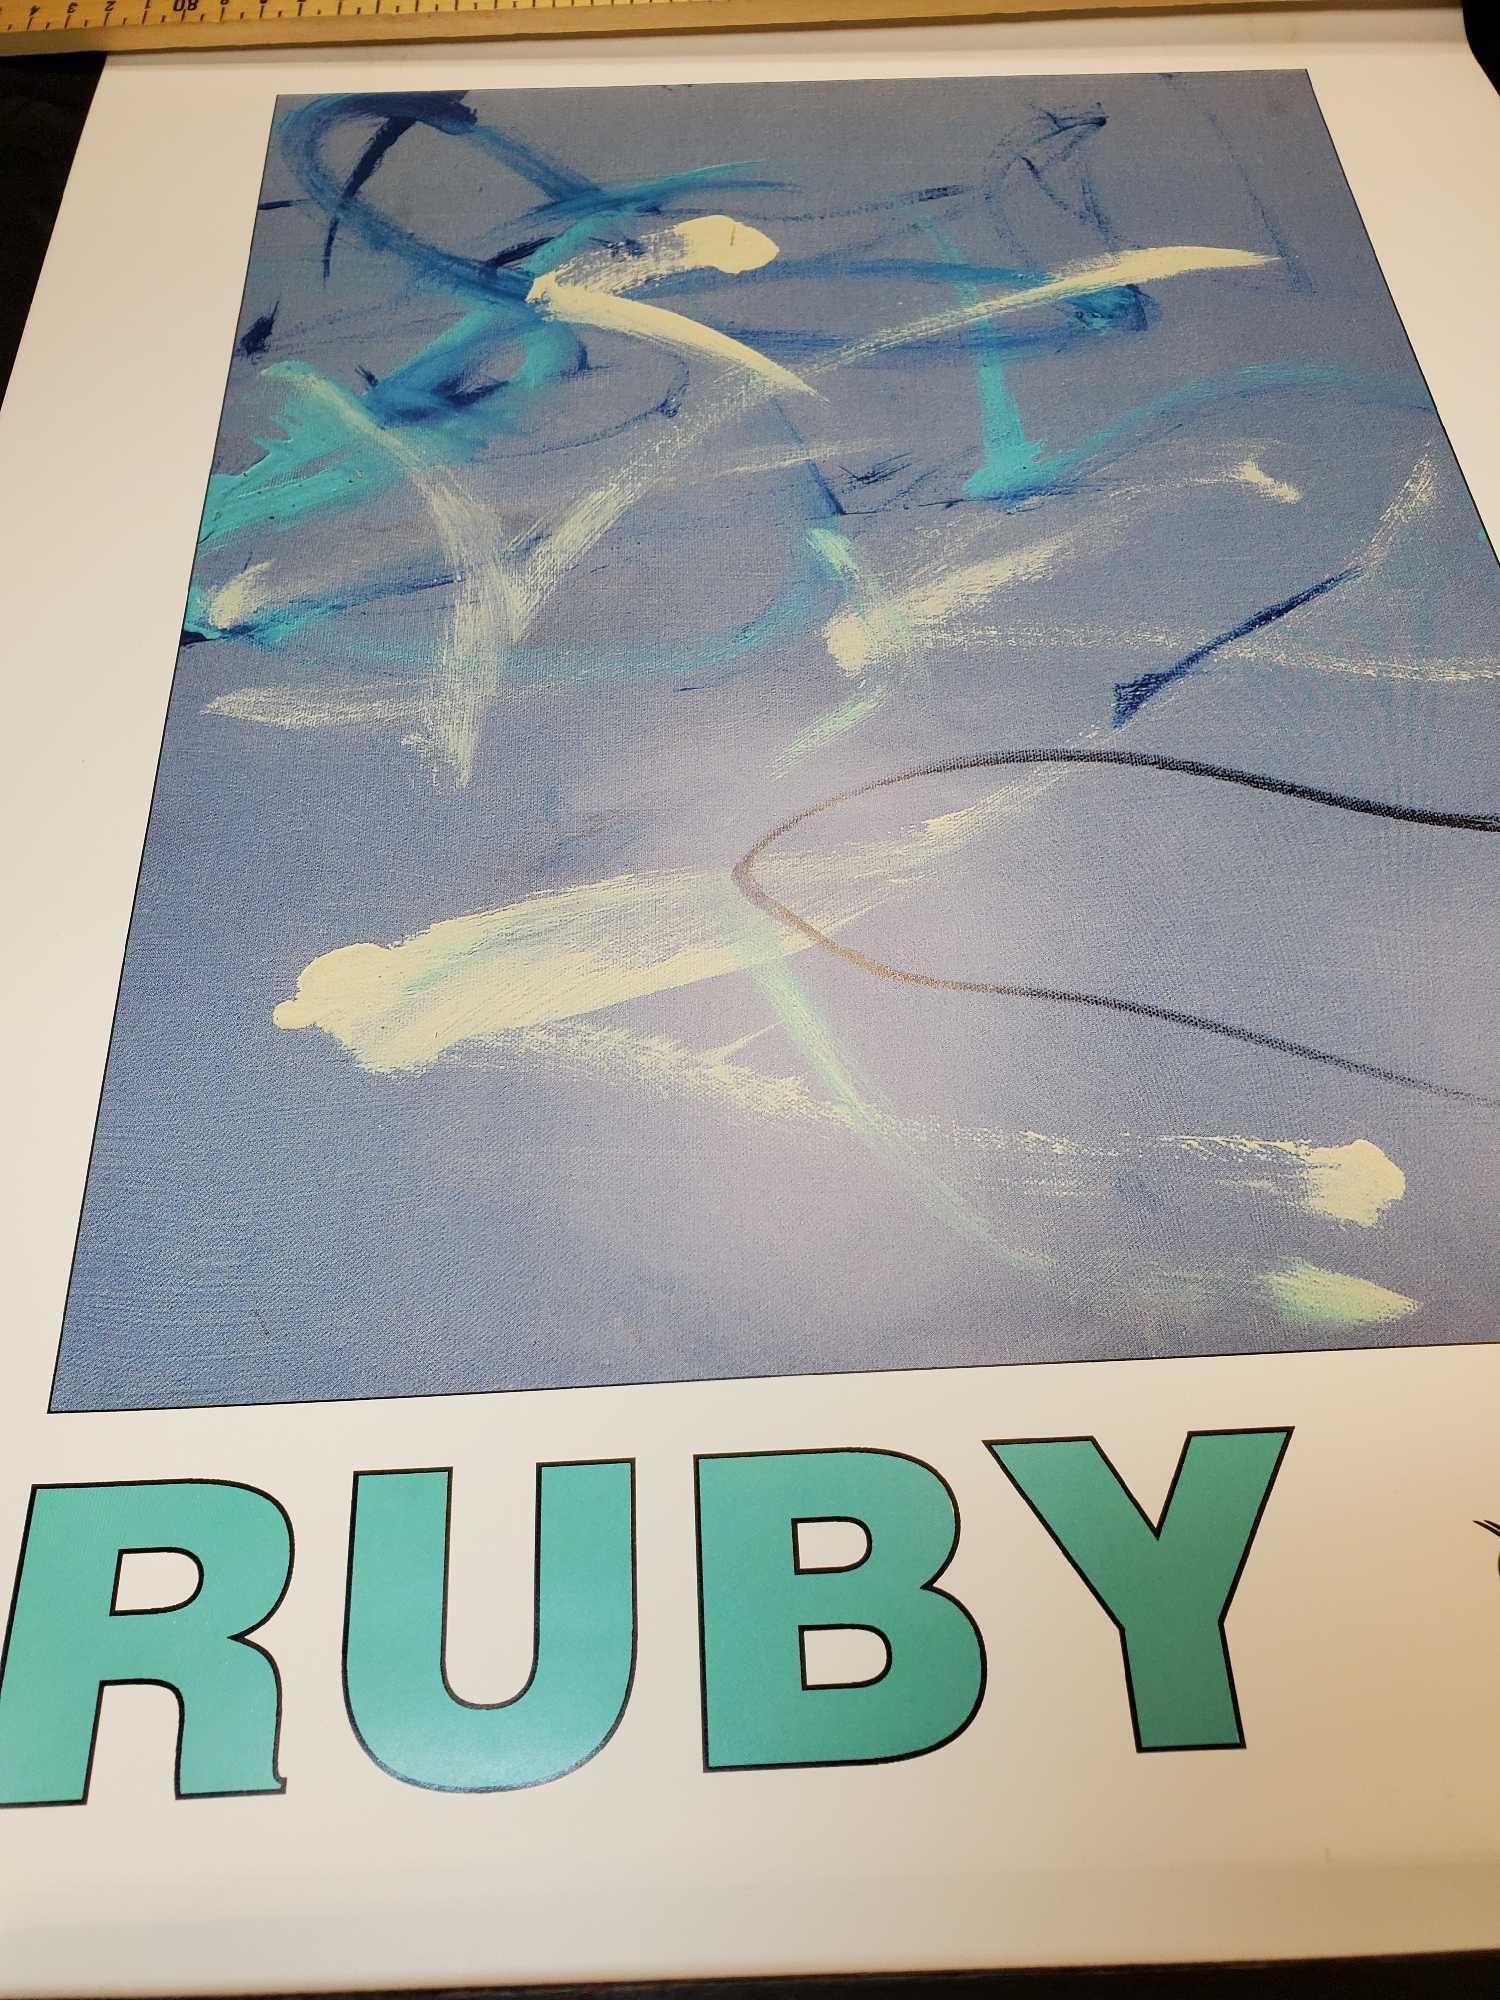 Limited Edition RUBY the Elephant art prints, 1991 and 1992